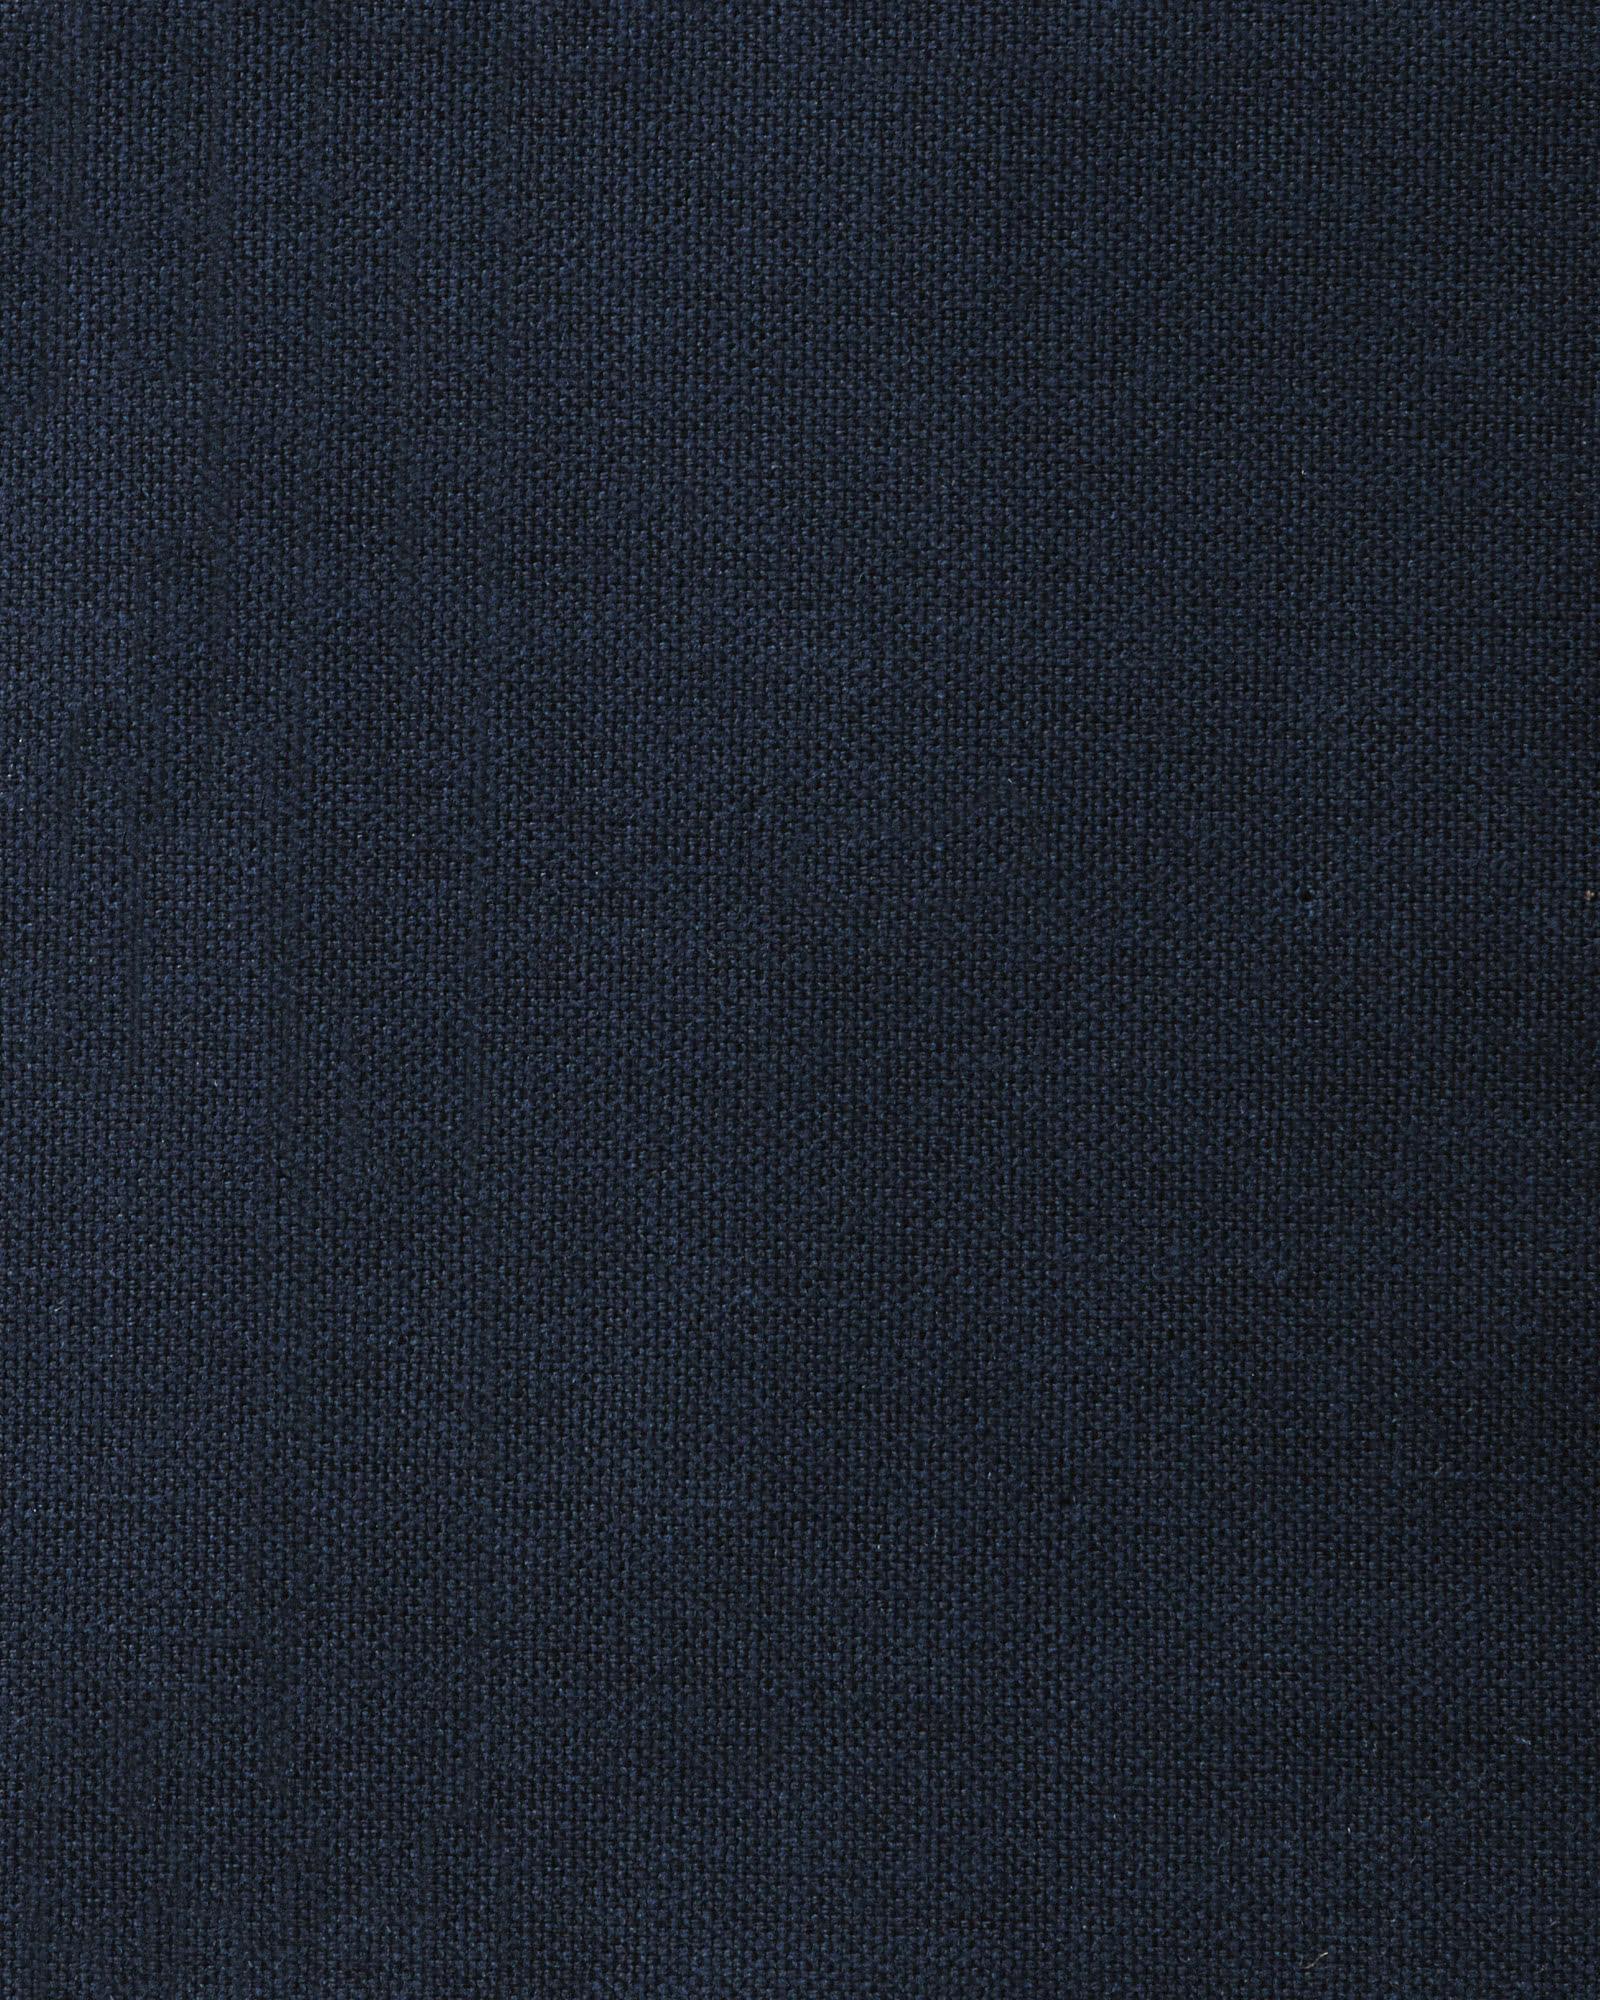 Brushed Cotton Canvas - Navy